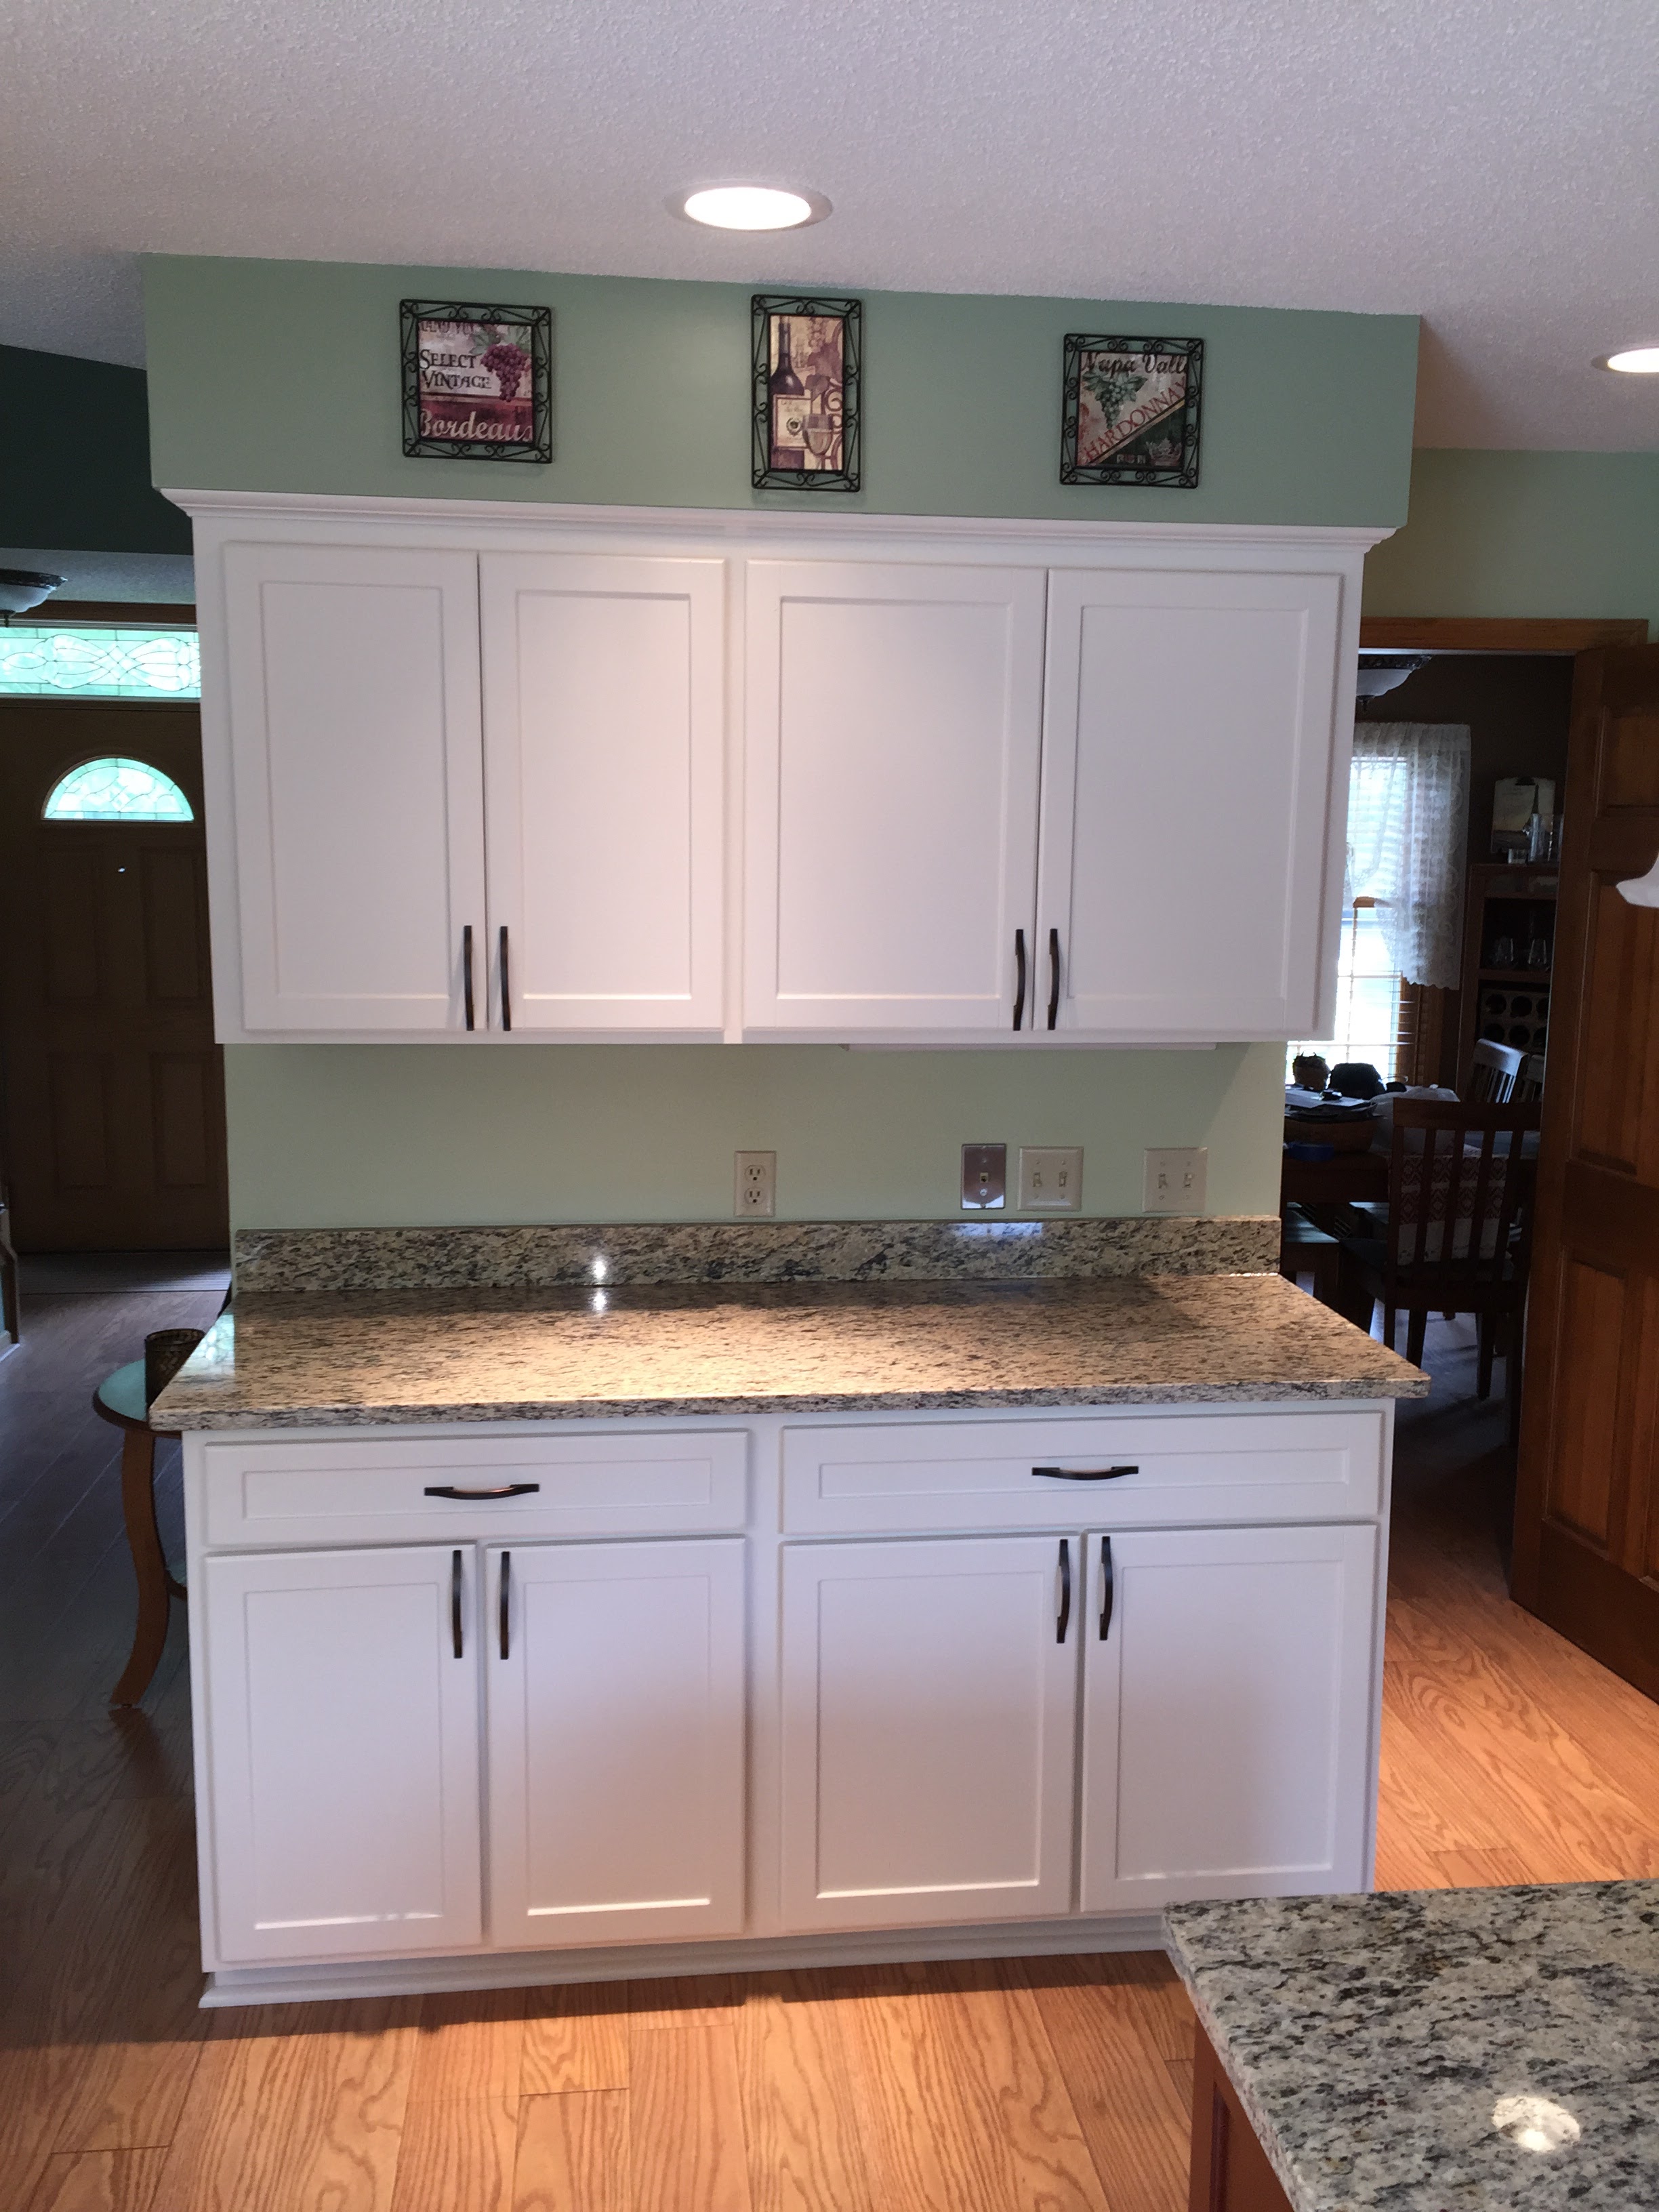 AFTER - Beautiful newly refaced cabinets in a modern, easy-to-clean and maintain White finish